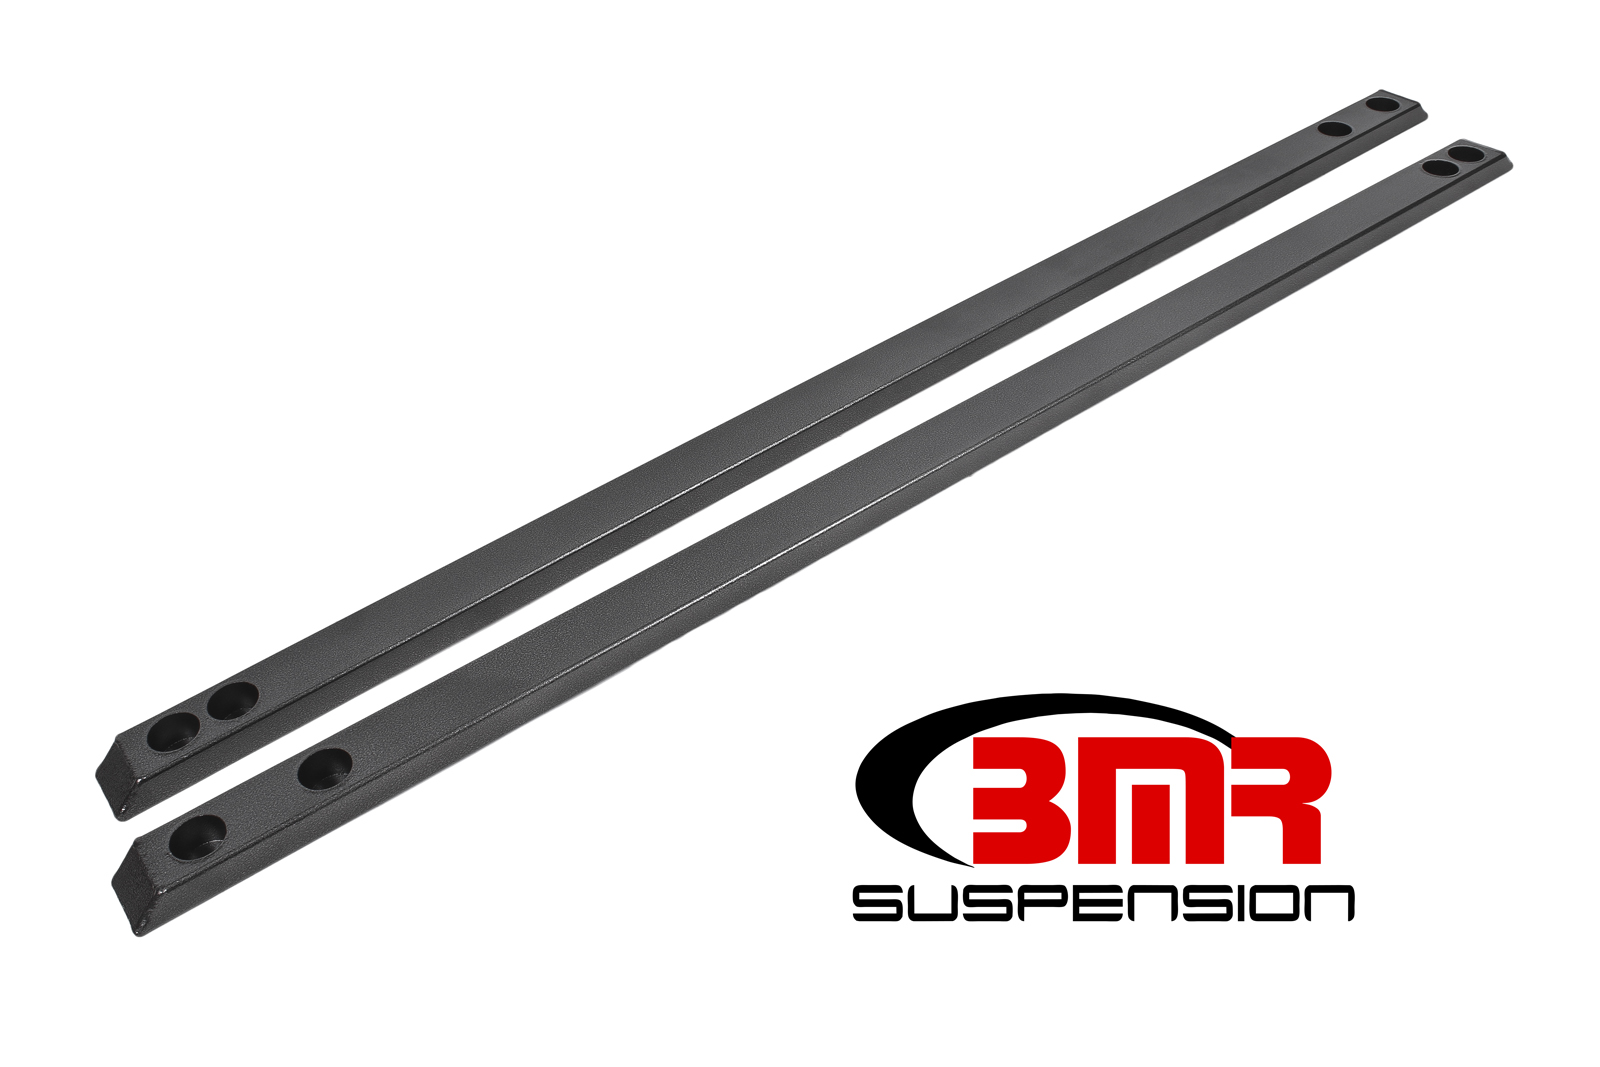 Chassis Jacking Rail, Super Low Profile, 2015-2018 Mustang, BMR Suspension - CJR002H